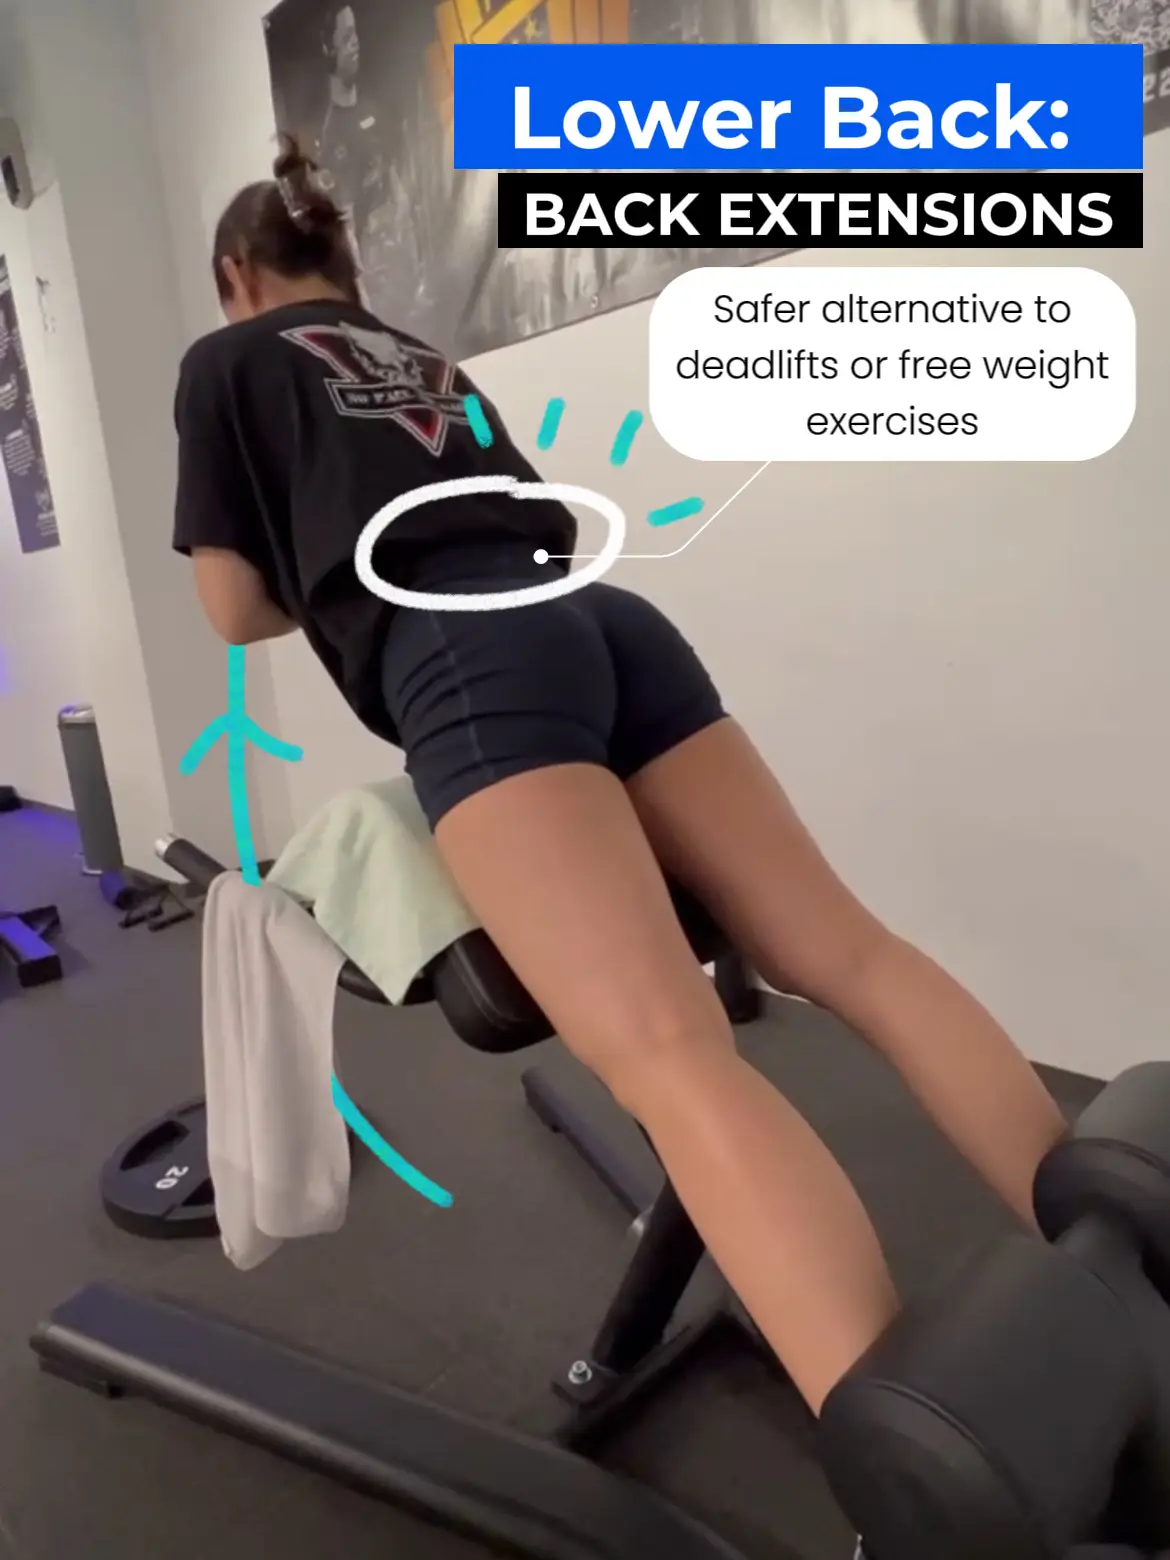 Alternative Exercises for Back Extensions